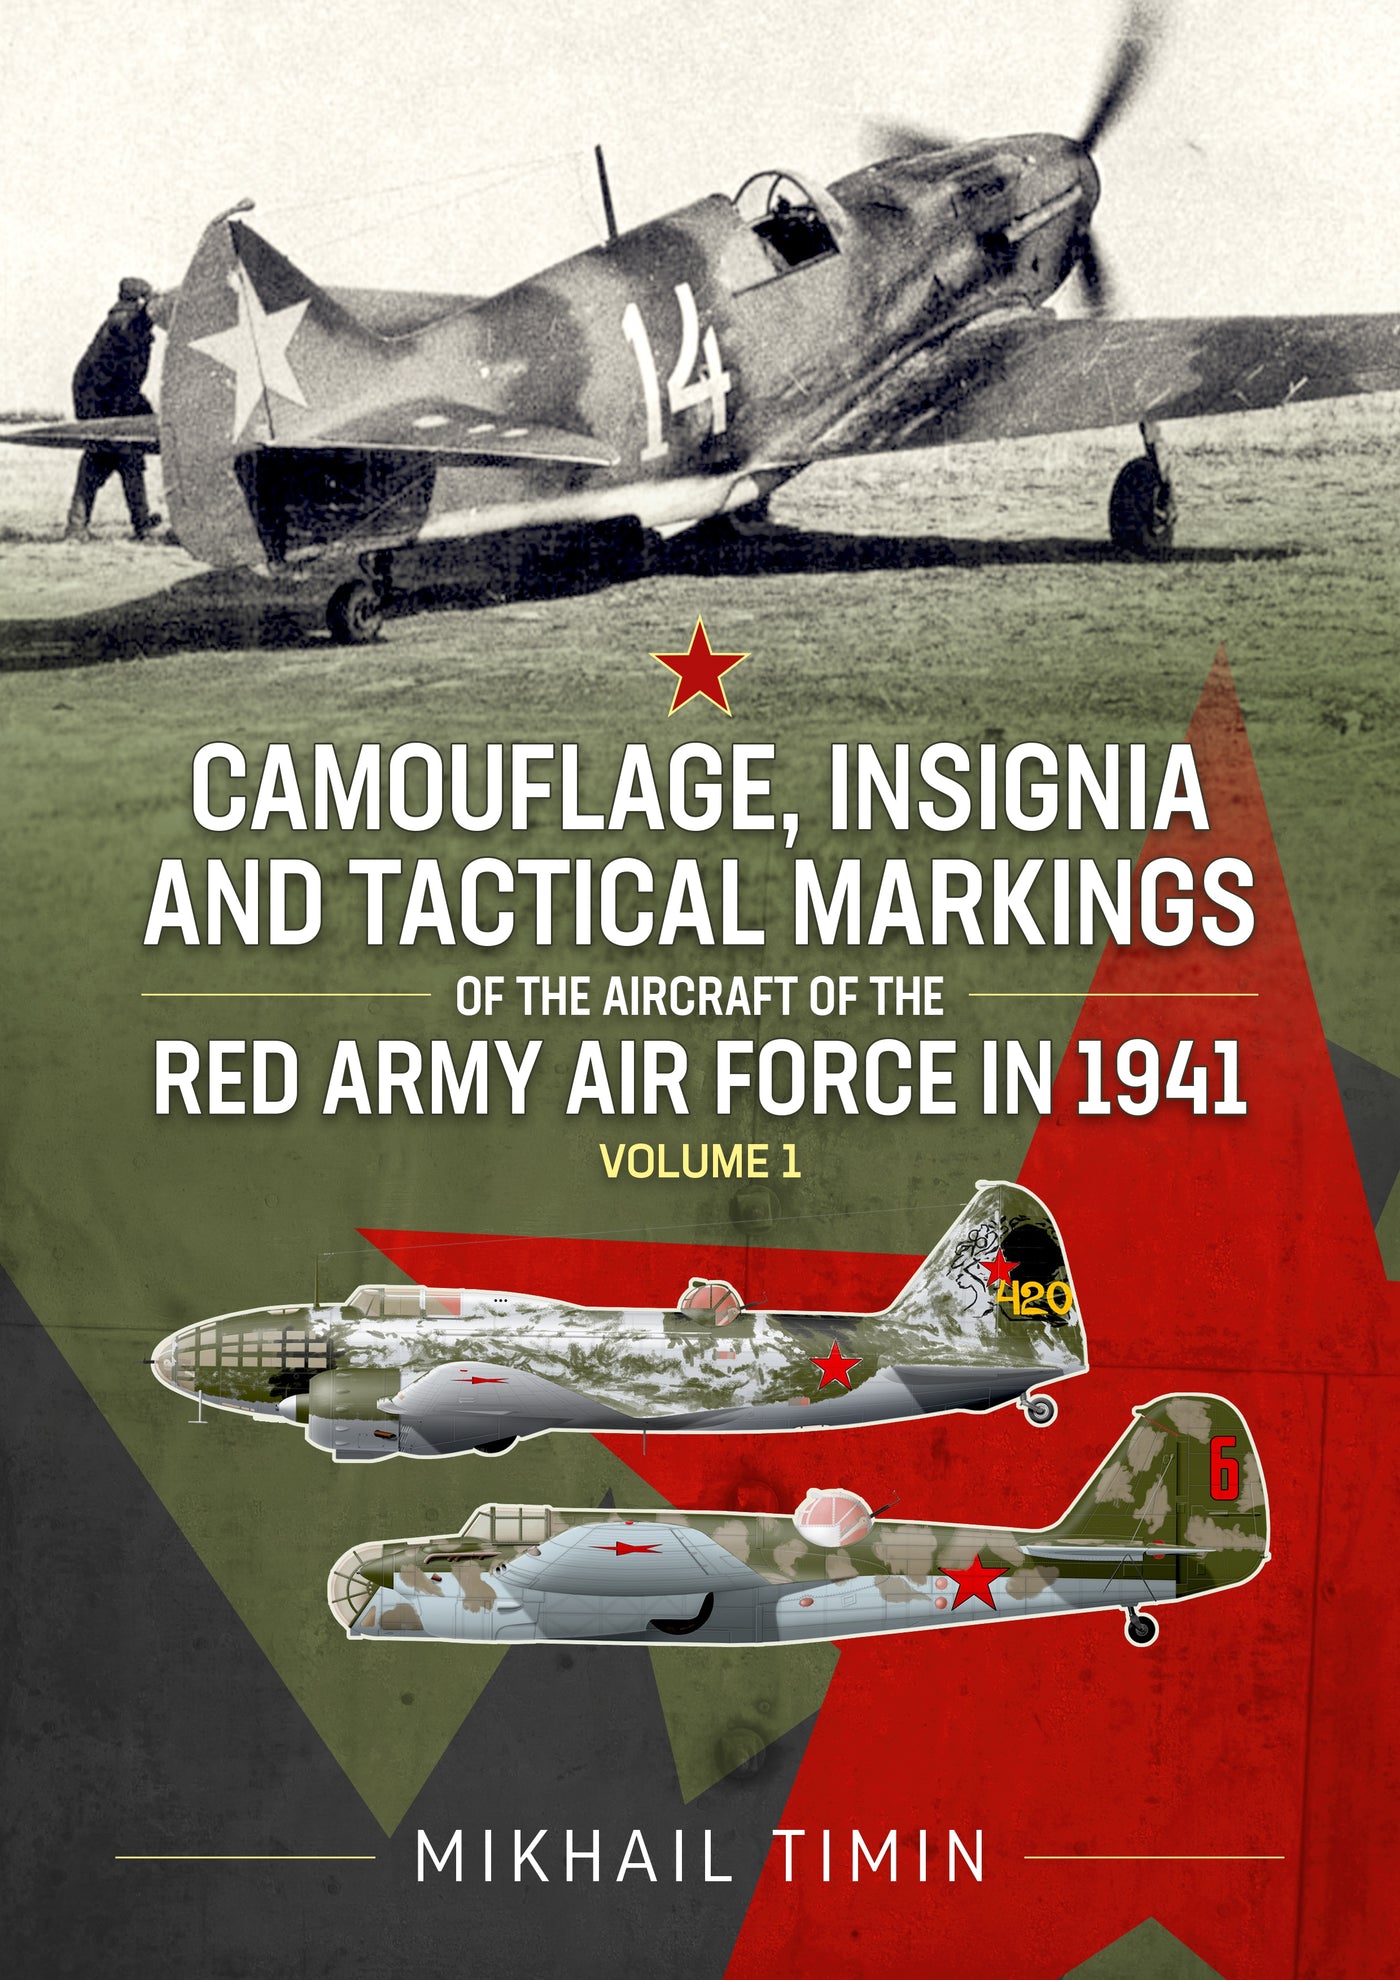 Camouflage, Insignia and Tactical Markings of the Aircraft of the Red Army Air Force in 1941 Vol.1